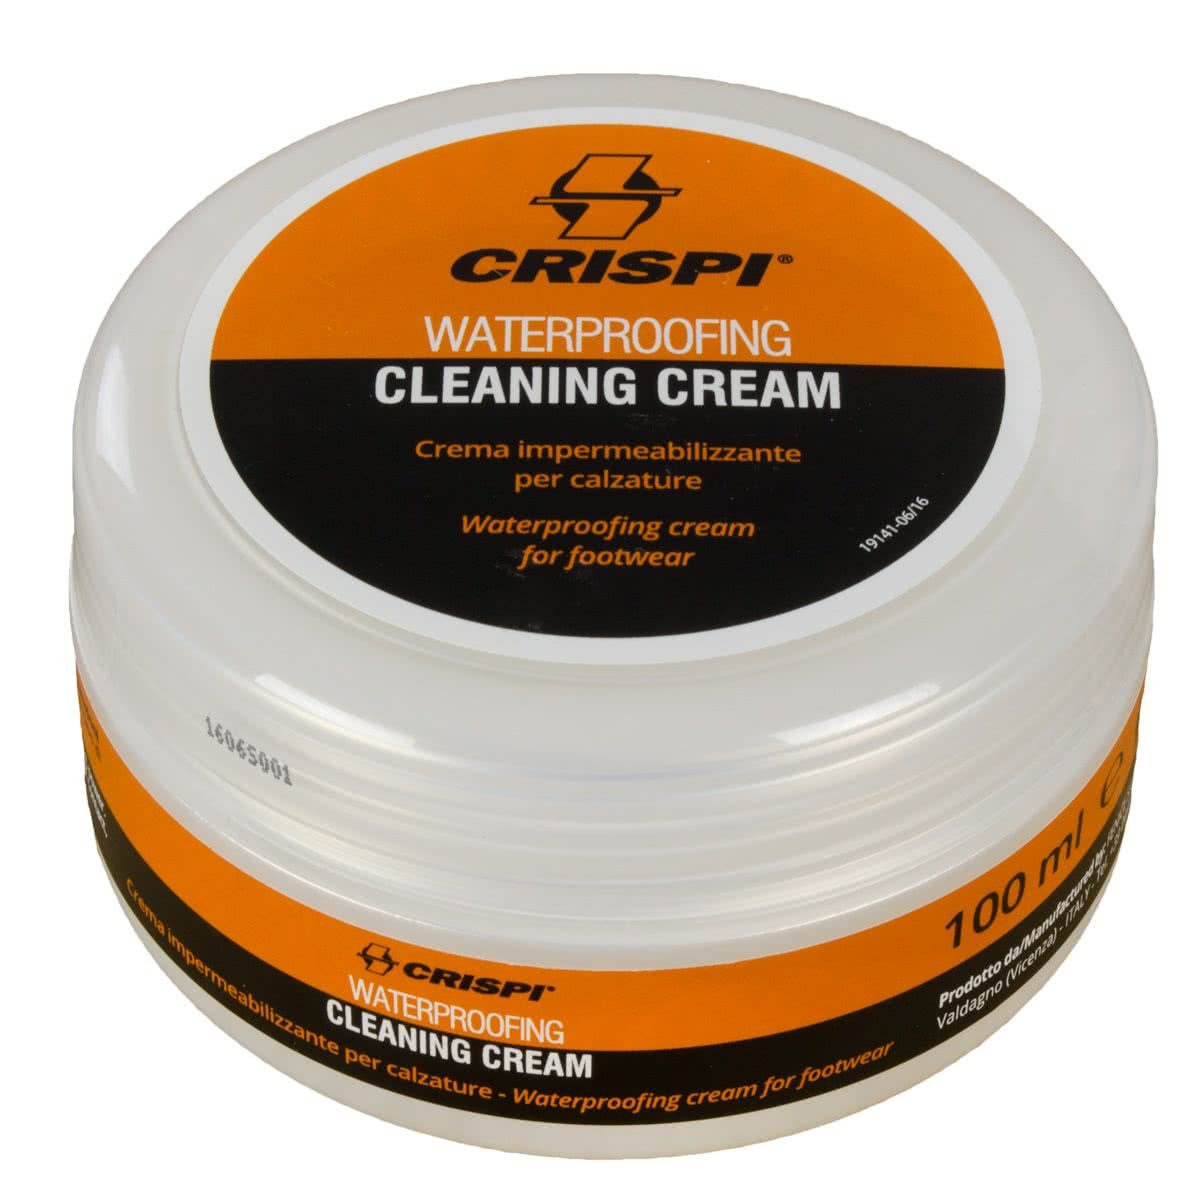 crispi waterproofing and cleaning cream